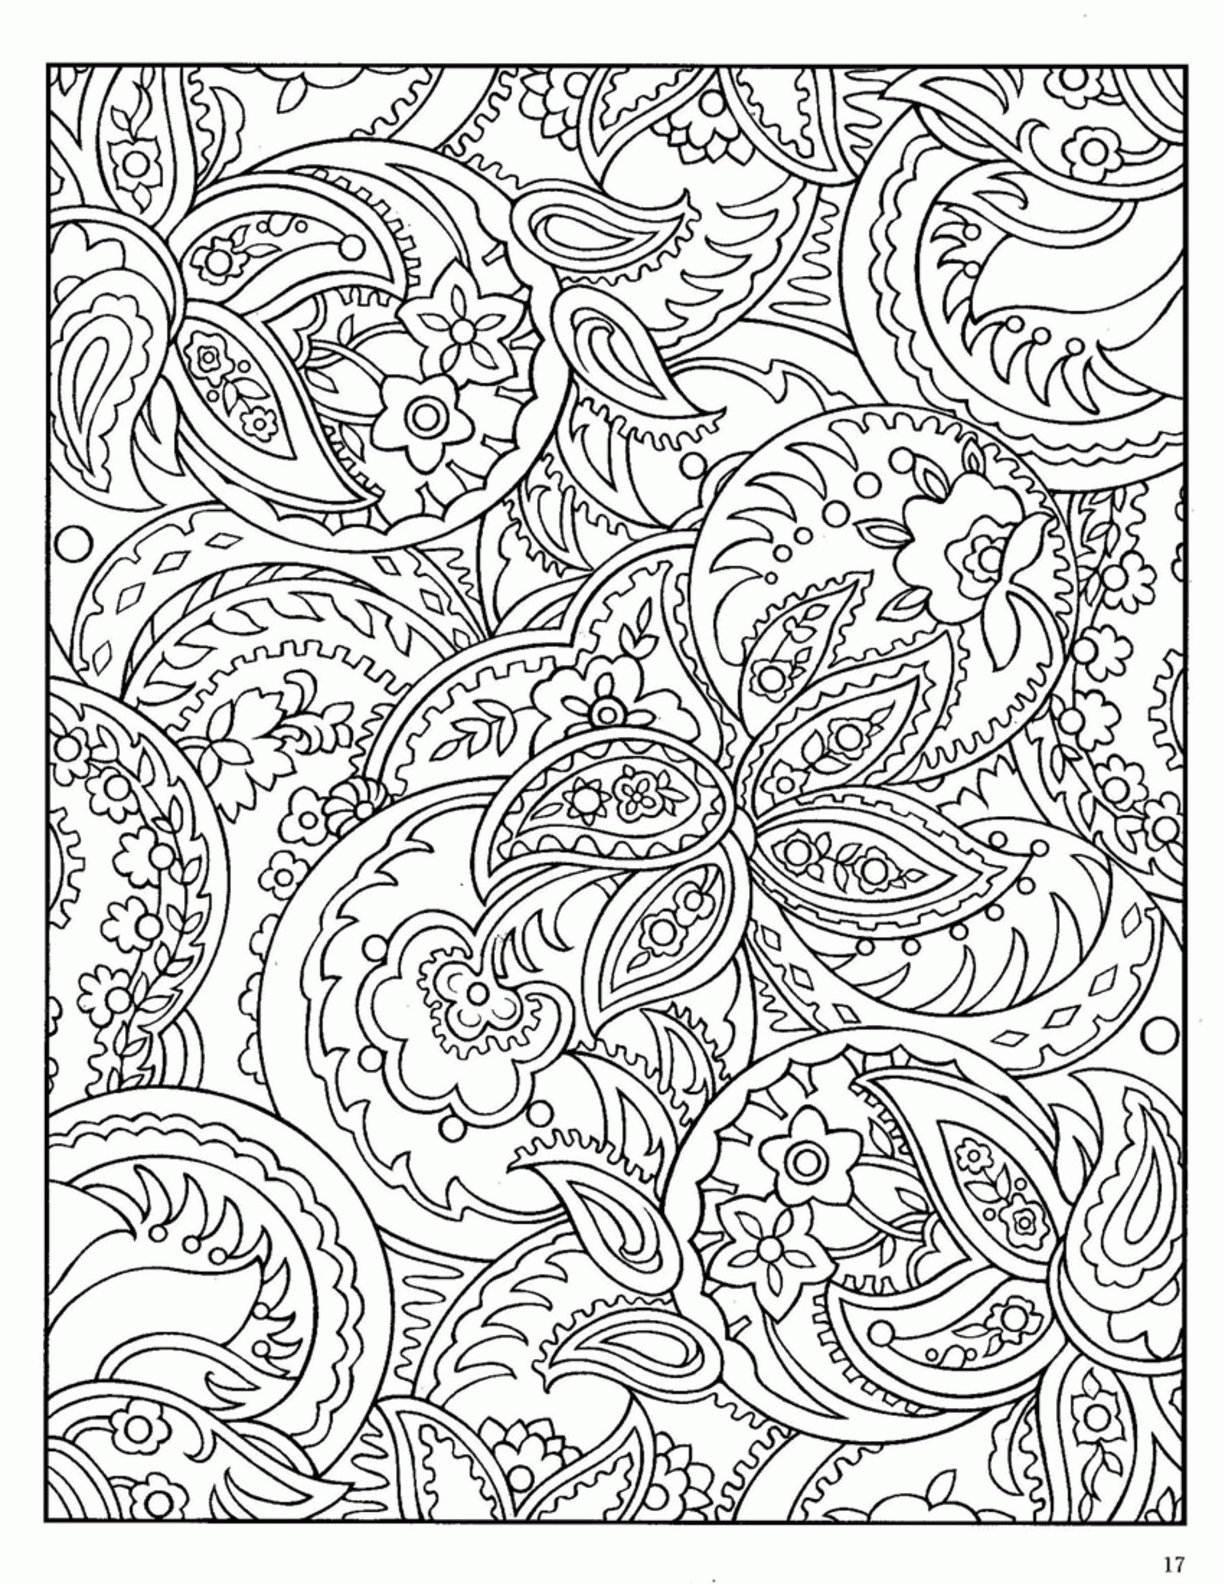 adult coloring page deco ornate owl. star wars printable adult ...